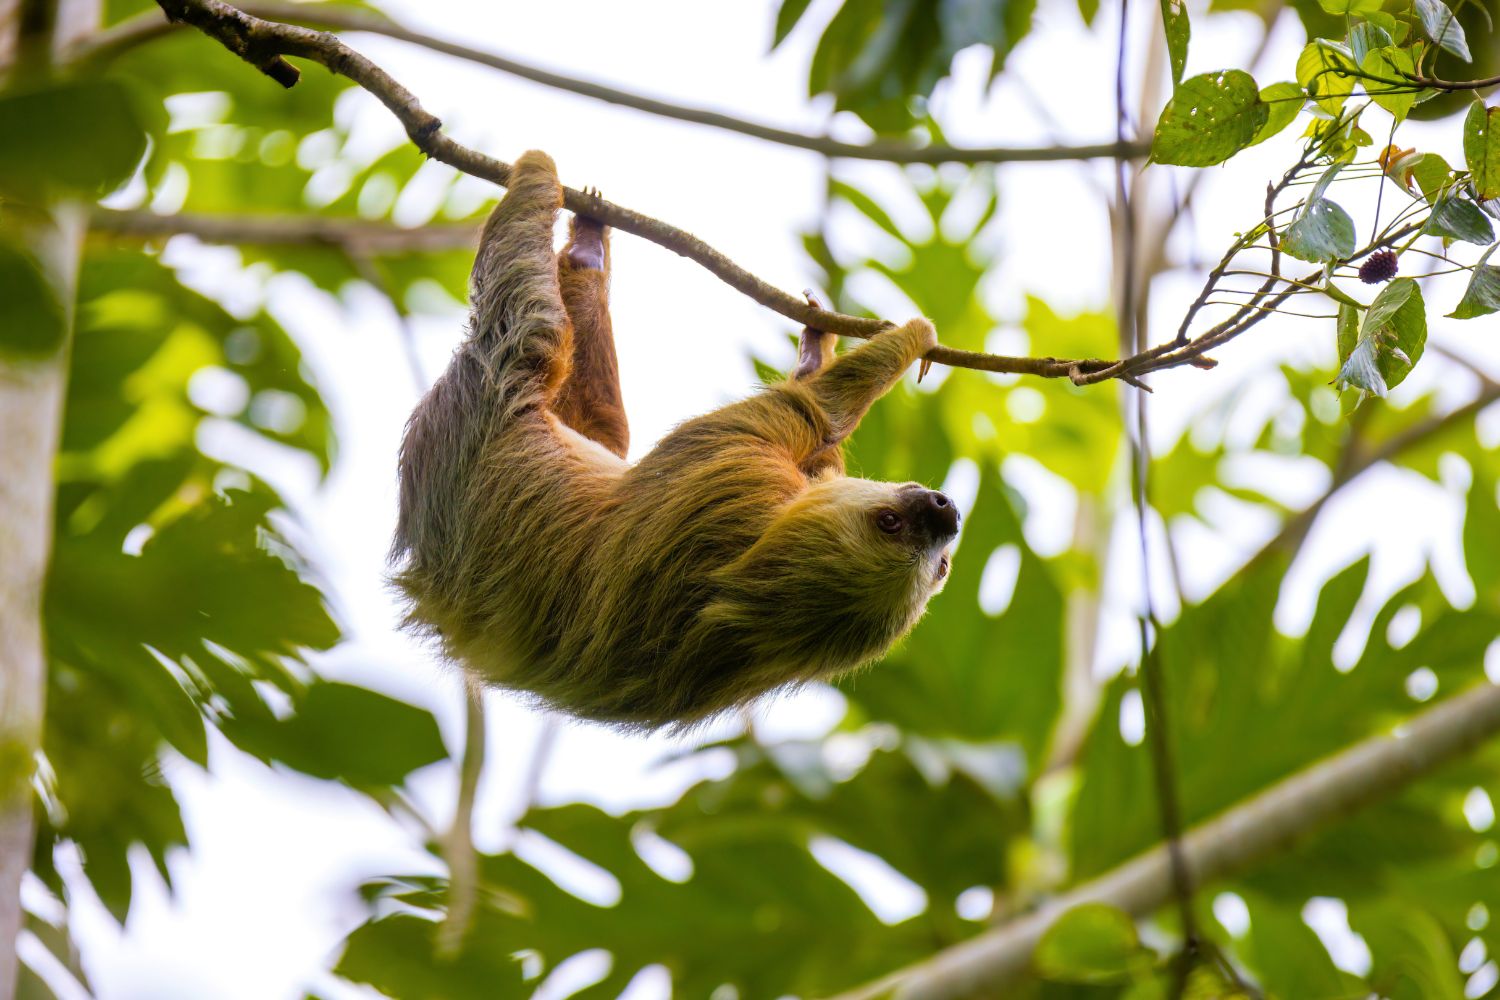 3. Sloths spend most of their lives upside down.